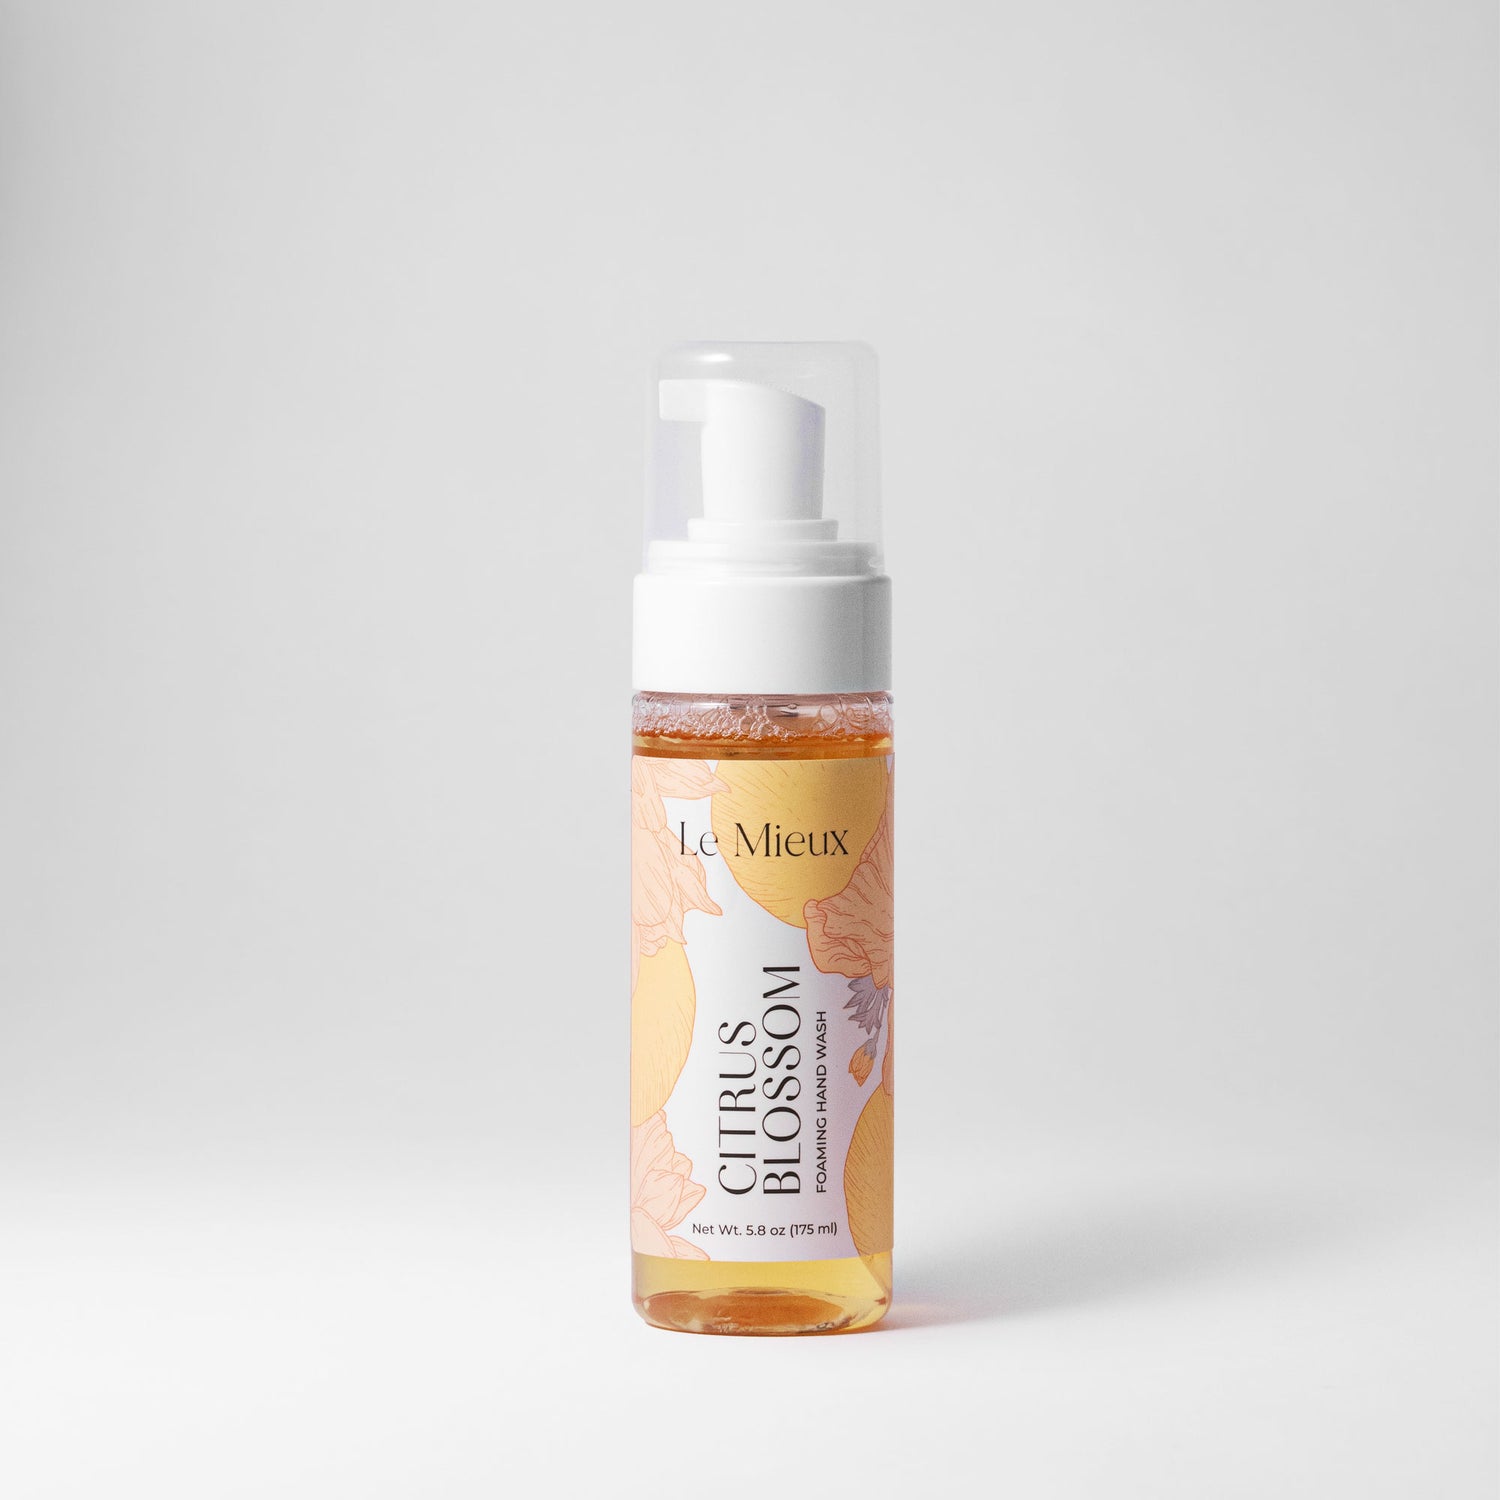  CITRUS BLOSSOM FOAMING HAND WASH from Le Mieux Skincare - featured